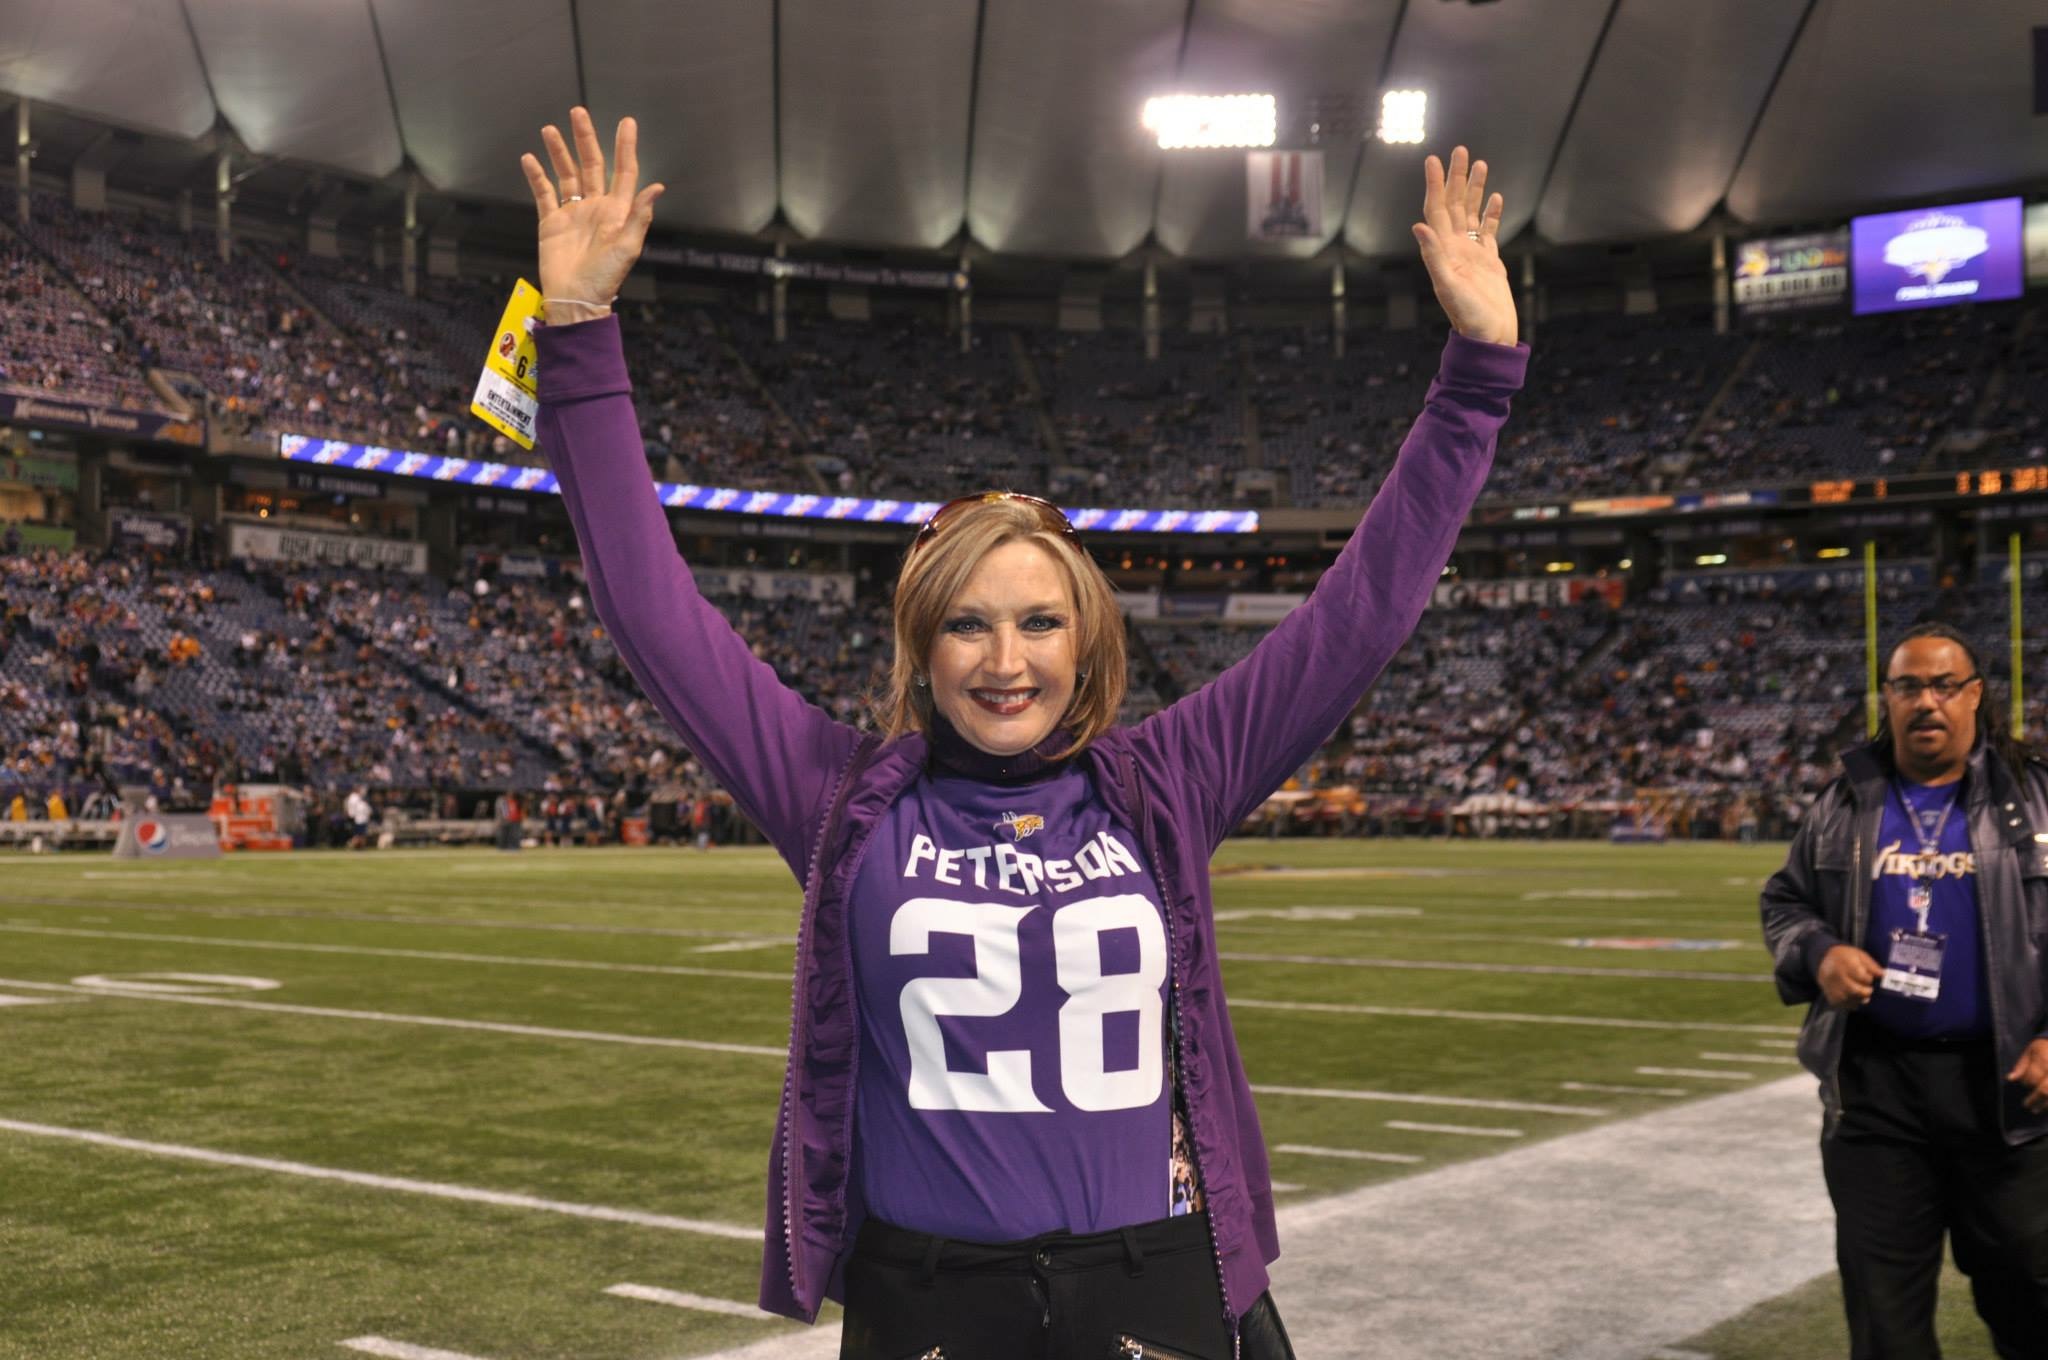 Super Fundraising Effort Lands Lung Cancer Patient Tickets to Super Bowl